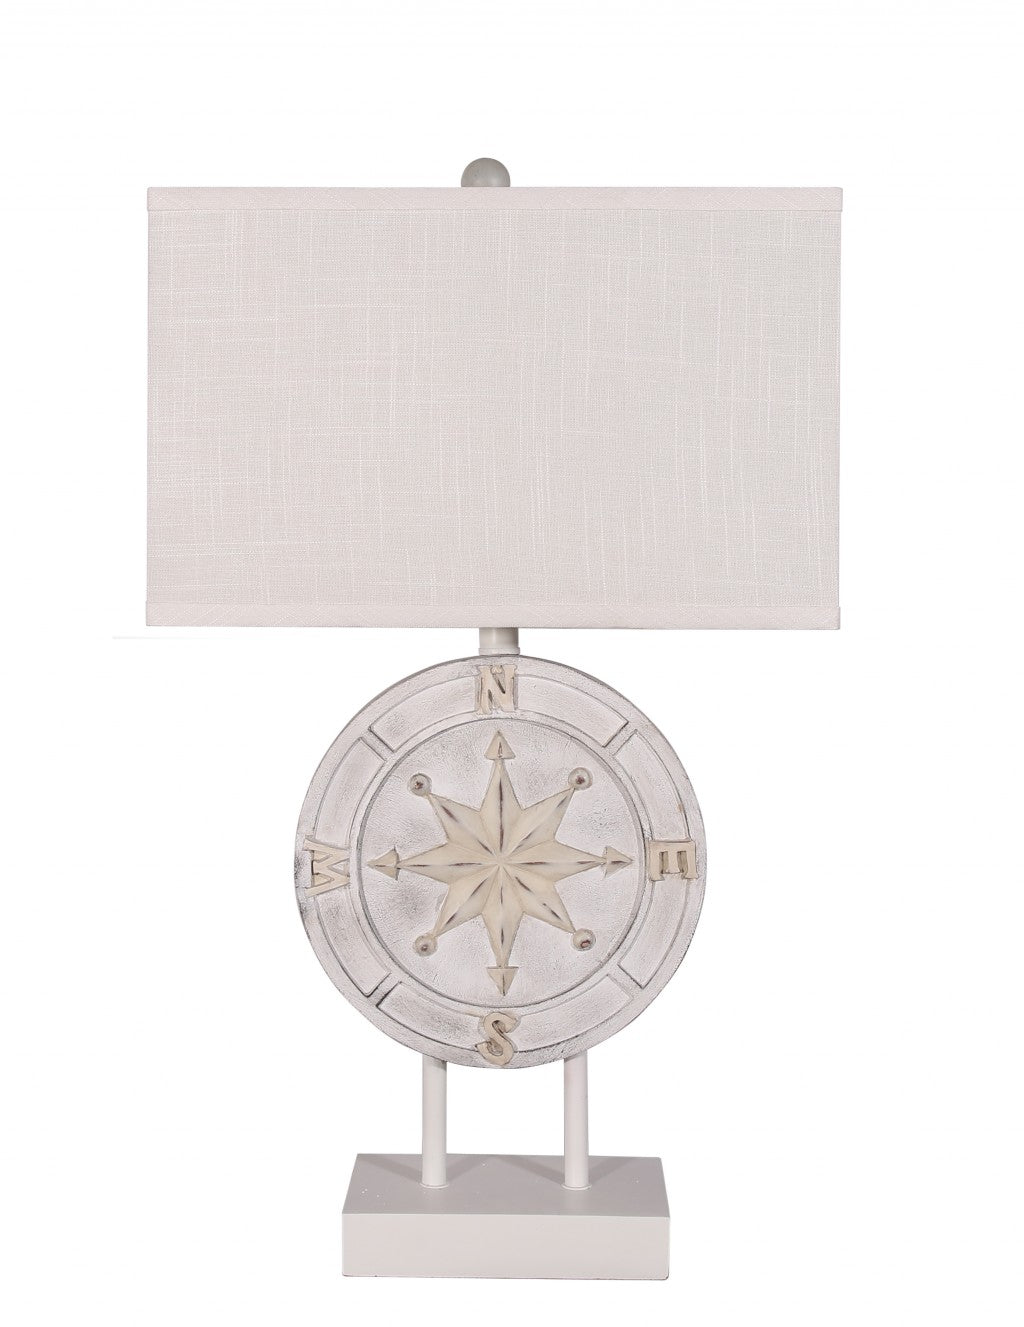 Set off 2 Beige Nautical Compass Table Lamps